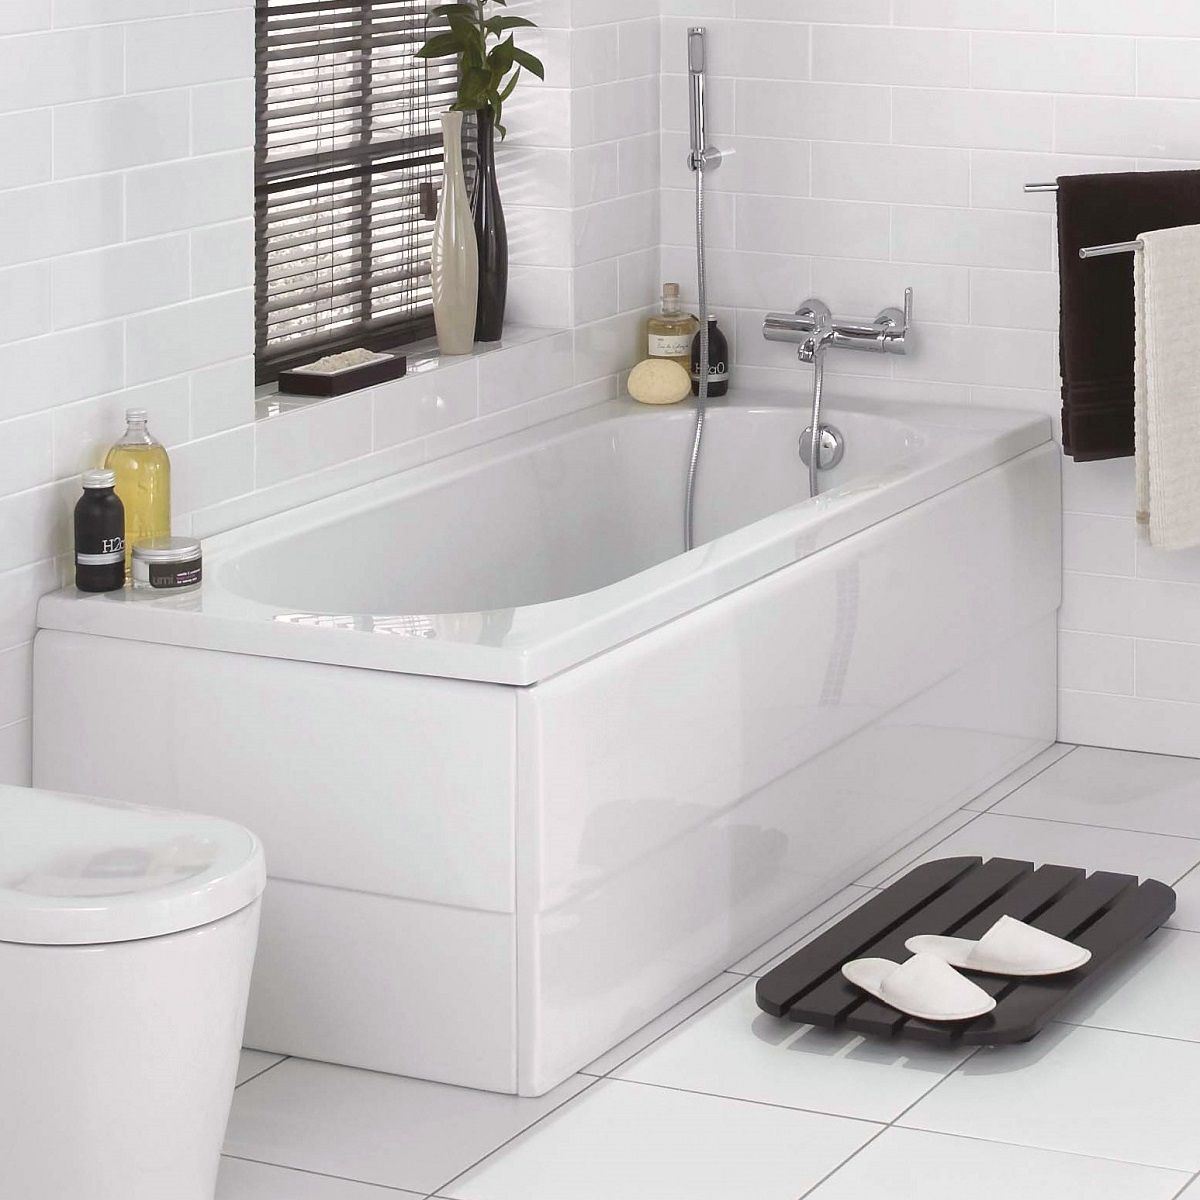 image example of a single ended bath